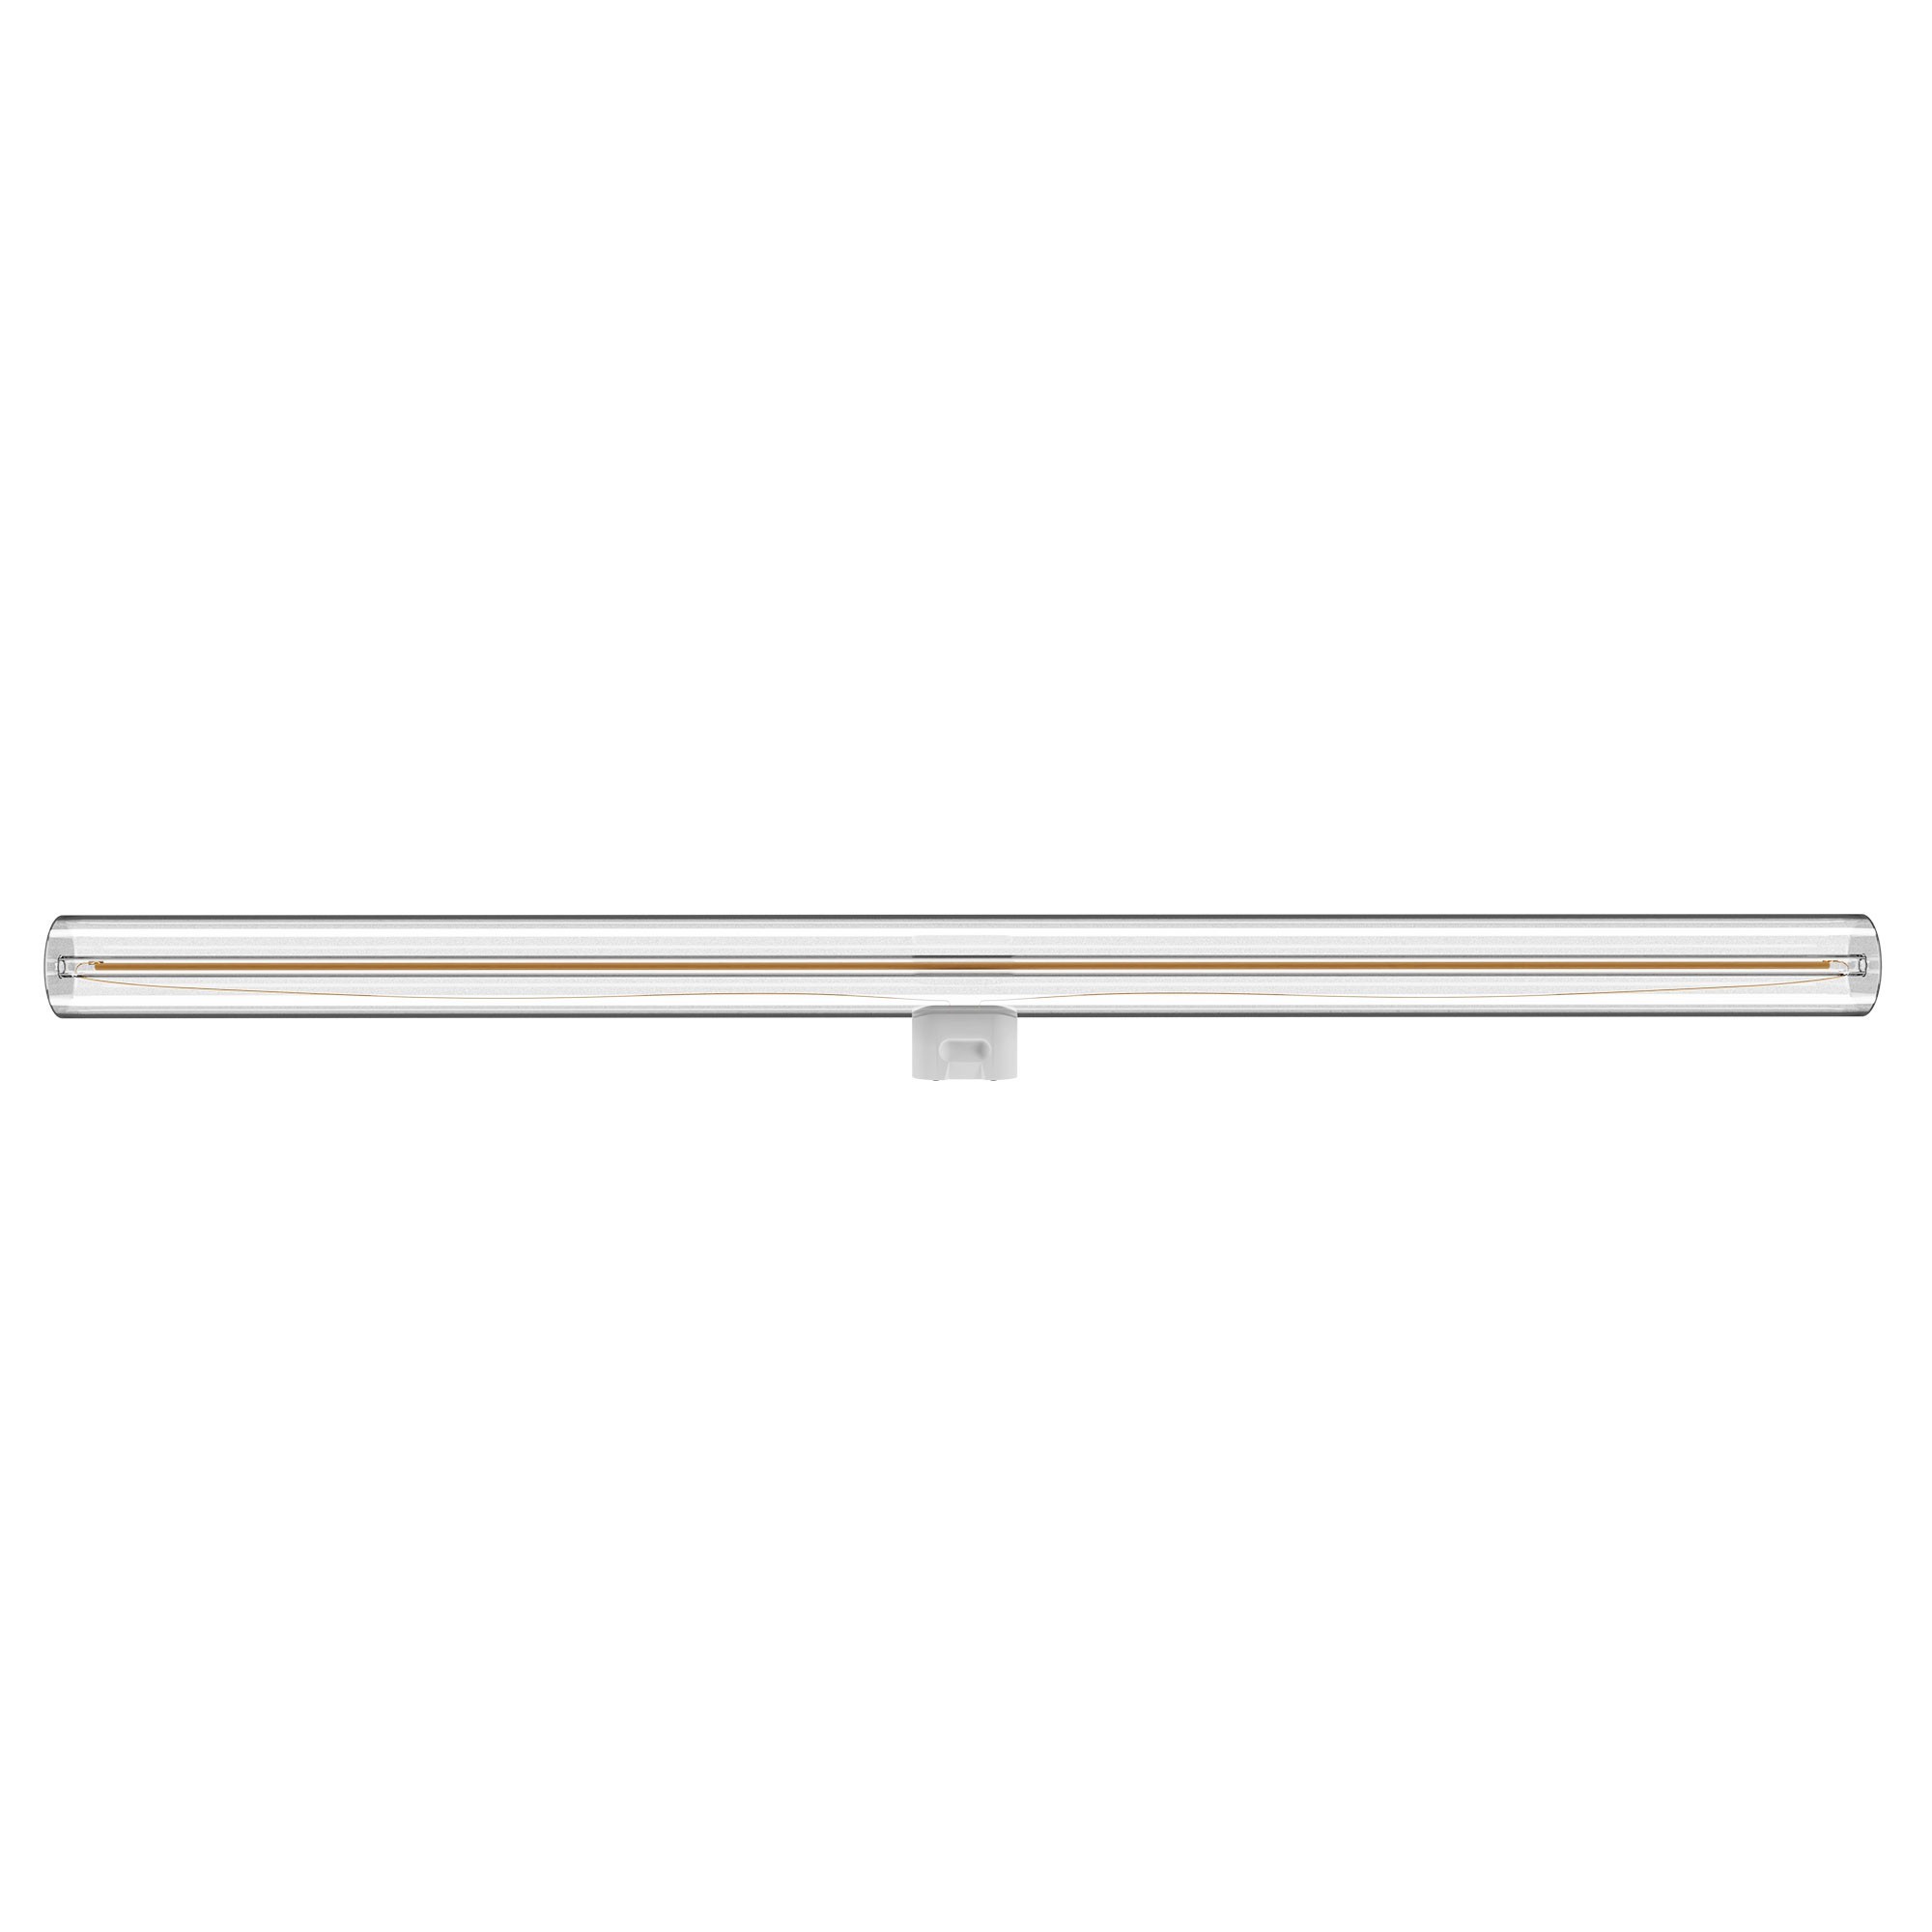 S02 - Linear LED light bulb L500, S14d, 7W, 2700K, 620Lm, with clear glass